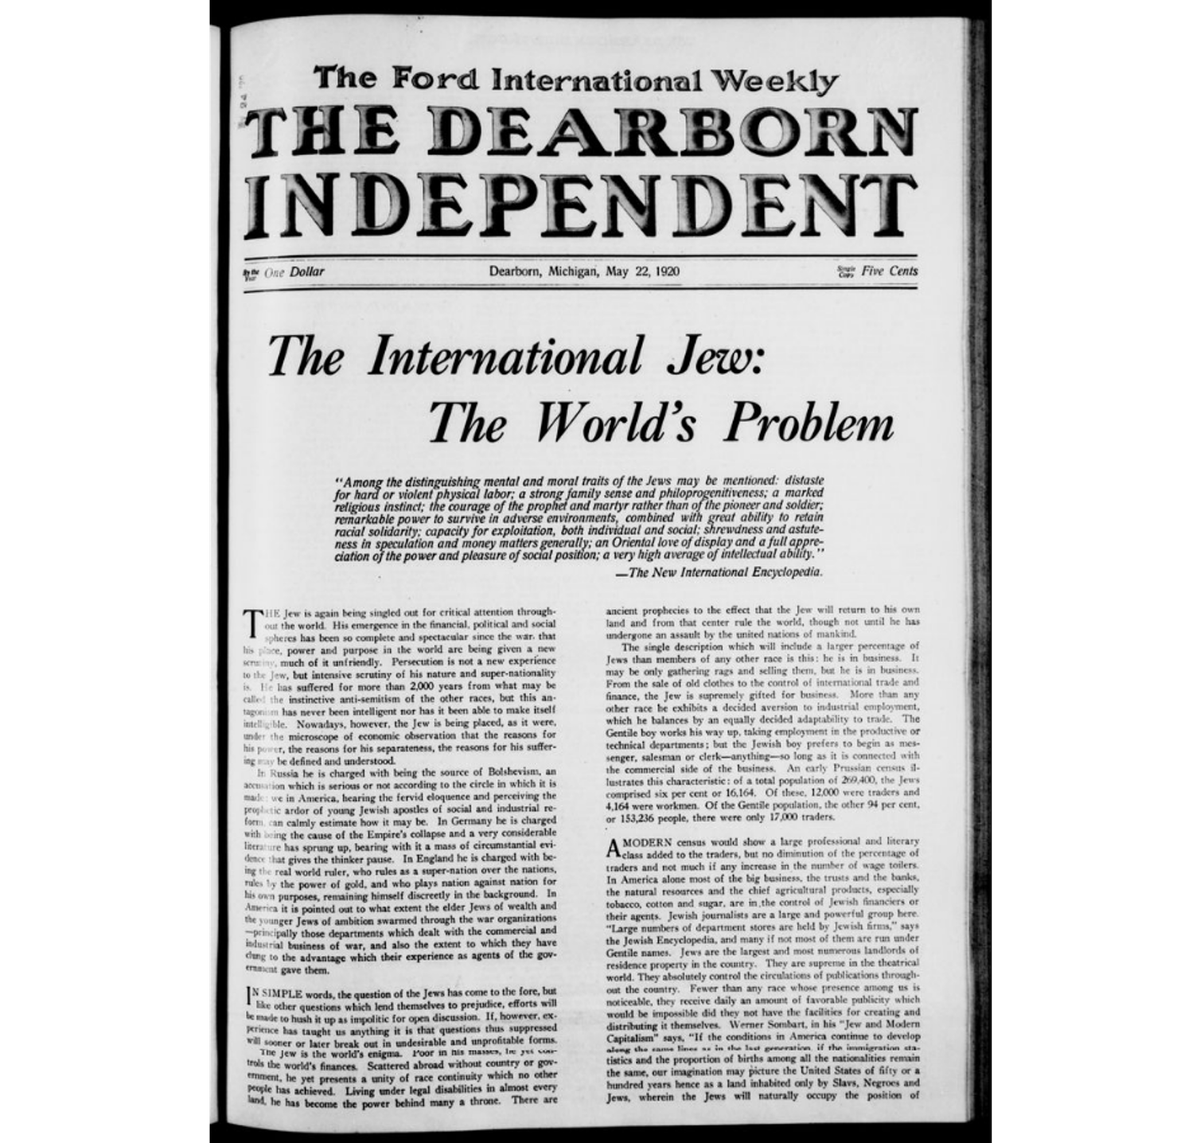 Circulation of the Dearborn Independent grew to 700,000 by 1924-1925 as its publisher mailed thousands of copies around the country, to bank presidents, Rotary clubs, women’s clubs, college presidents & the members of Congress. The publisher was the industrial tycoon Henry Ford.